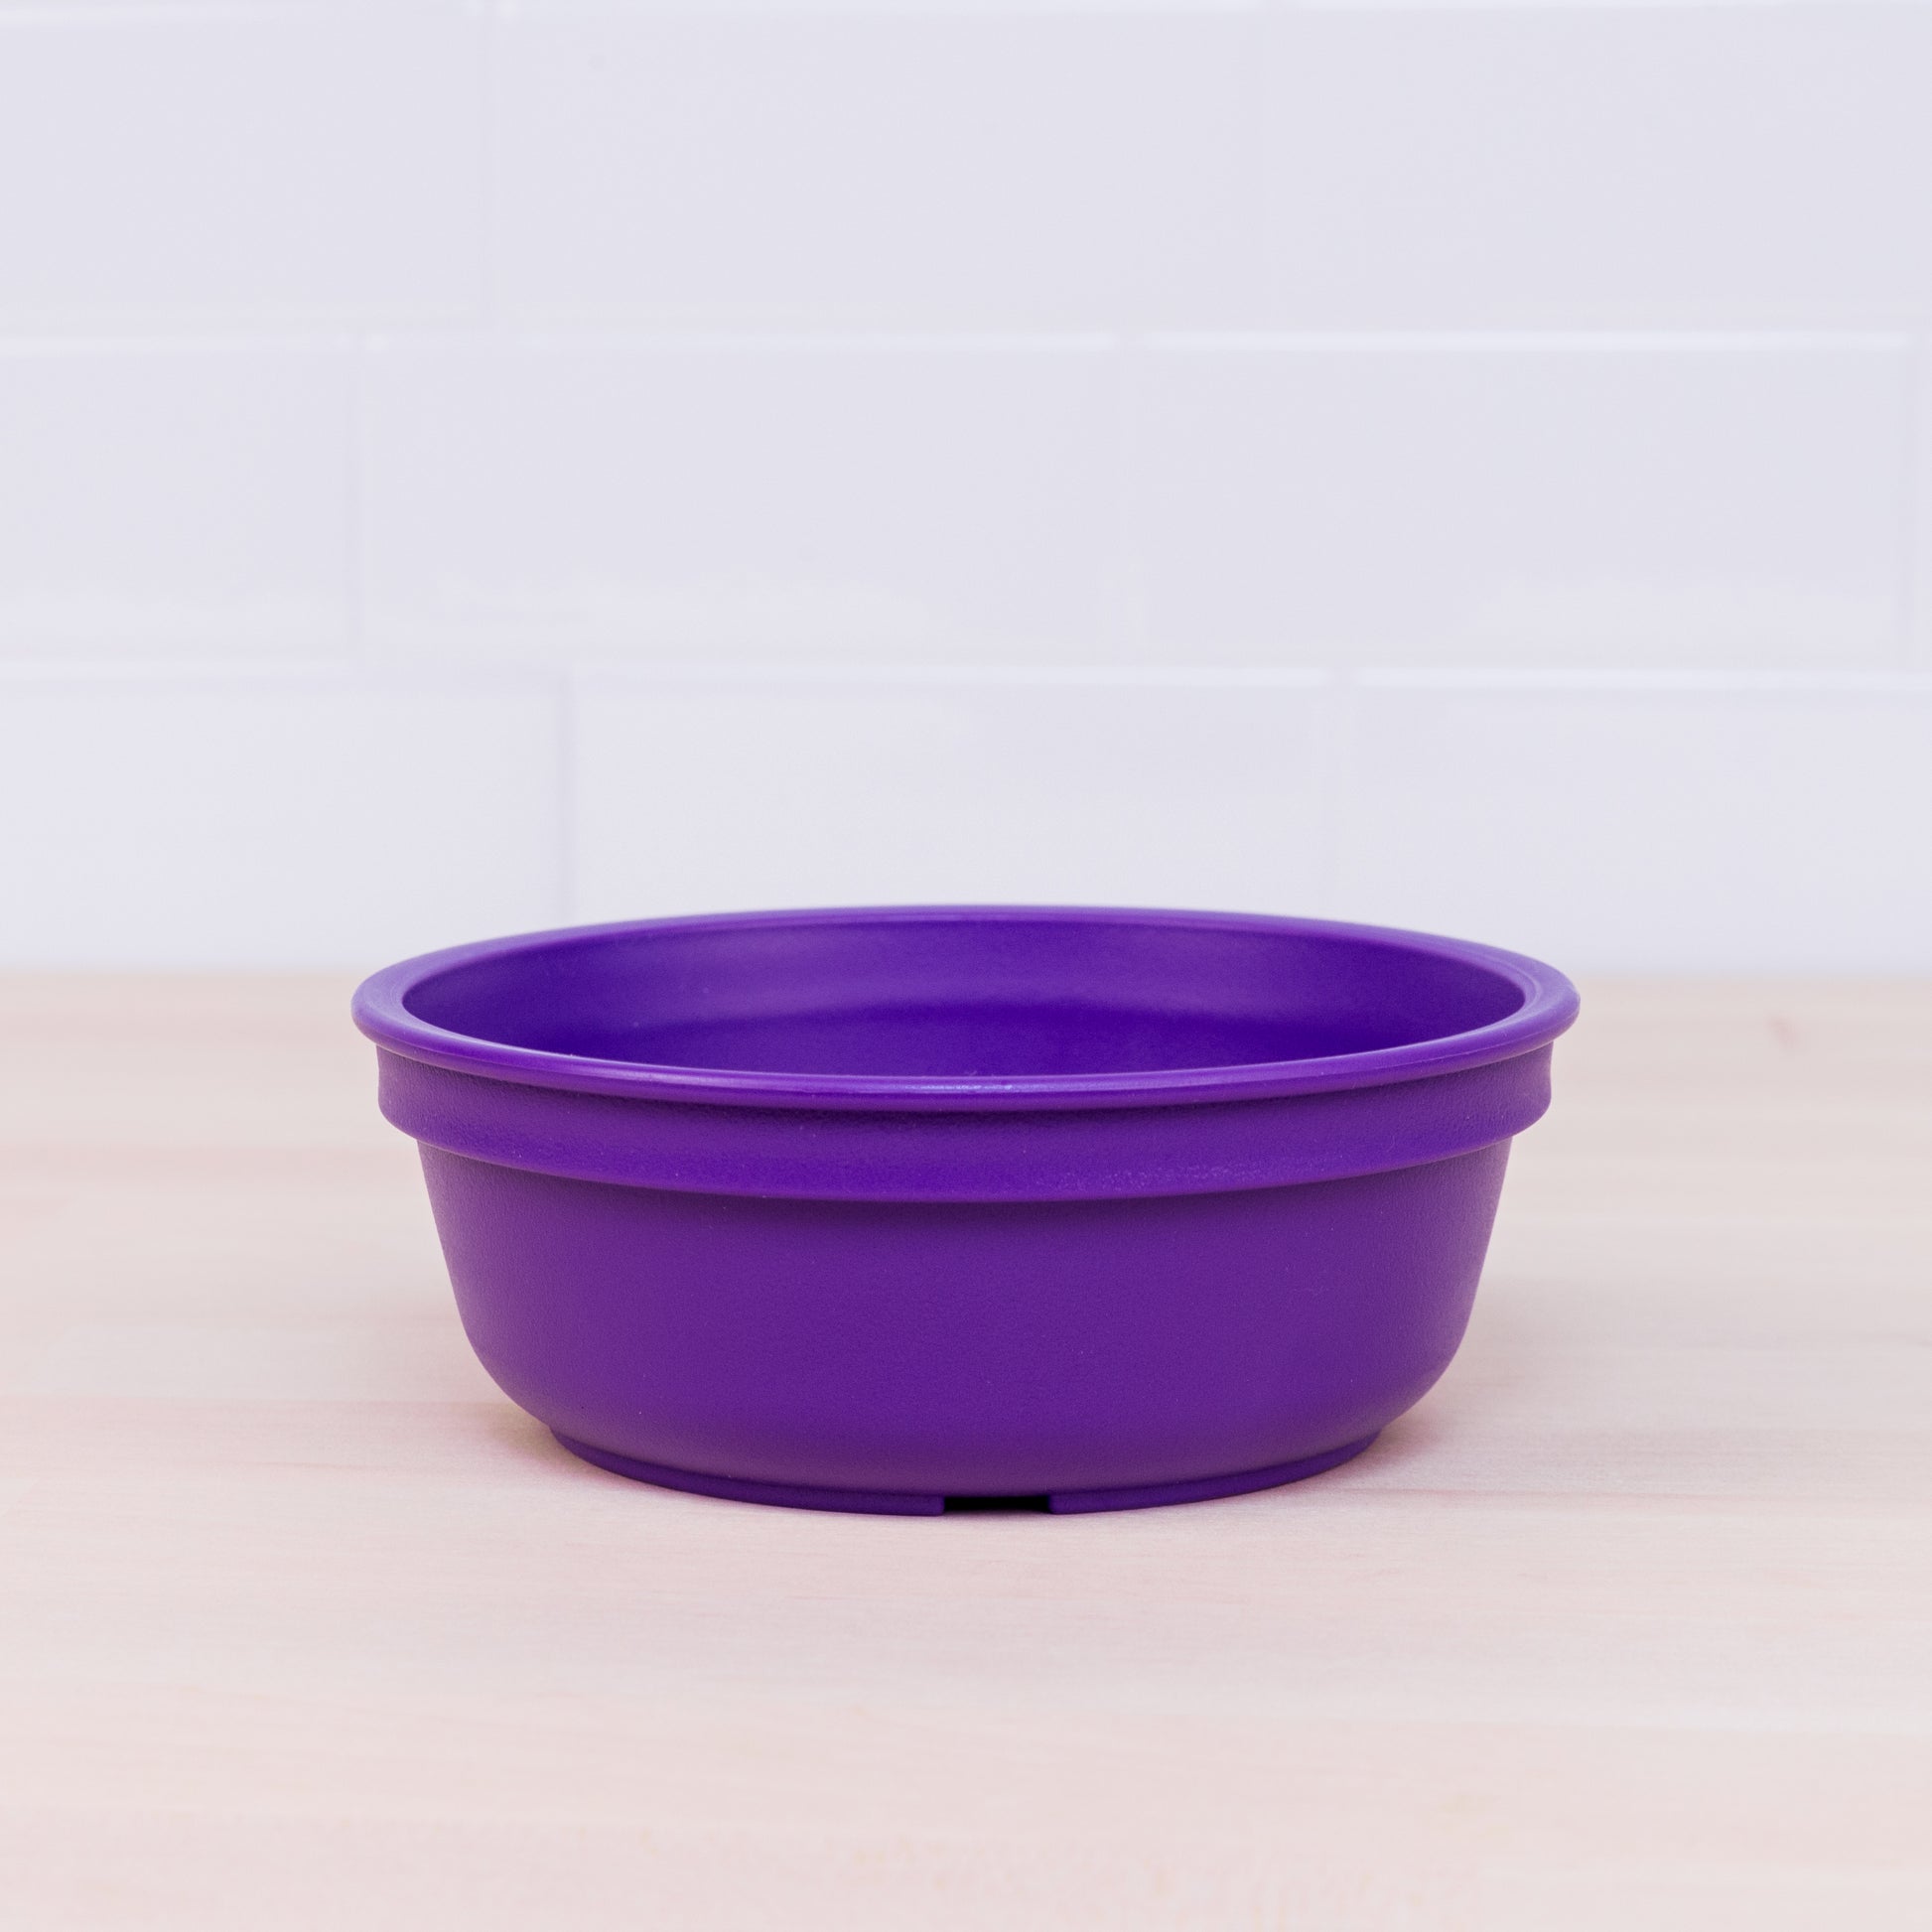 Re-Play Bowl | Standard Size in Amethyst from Bear & Moo